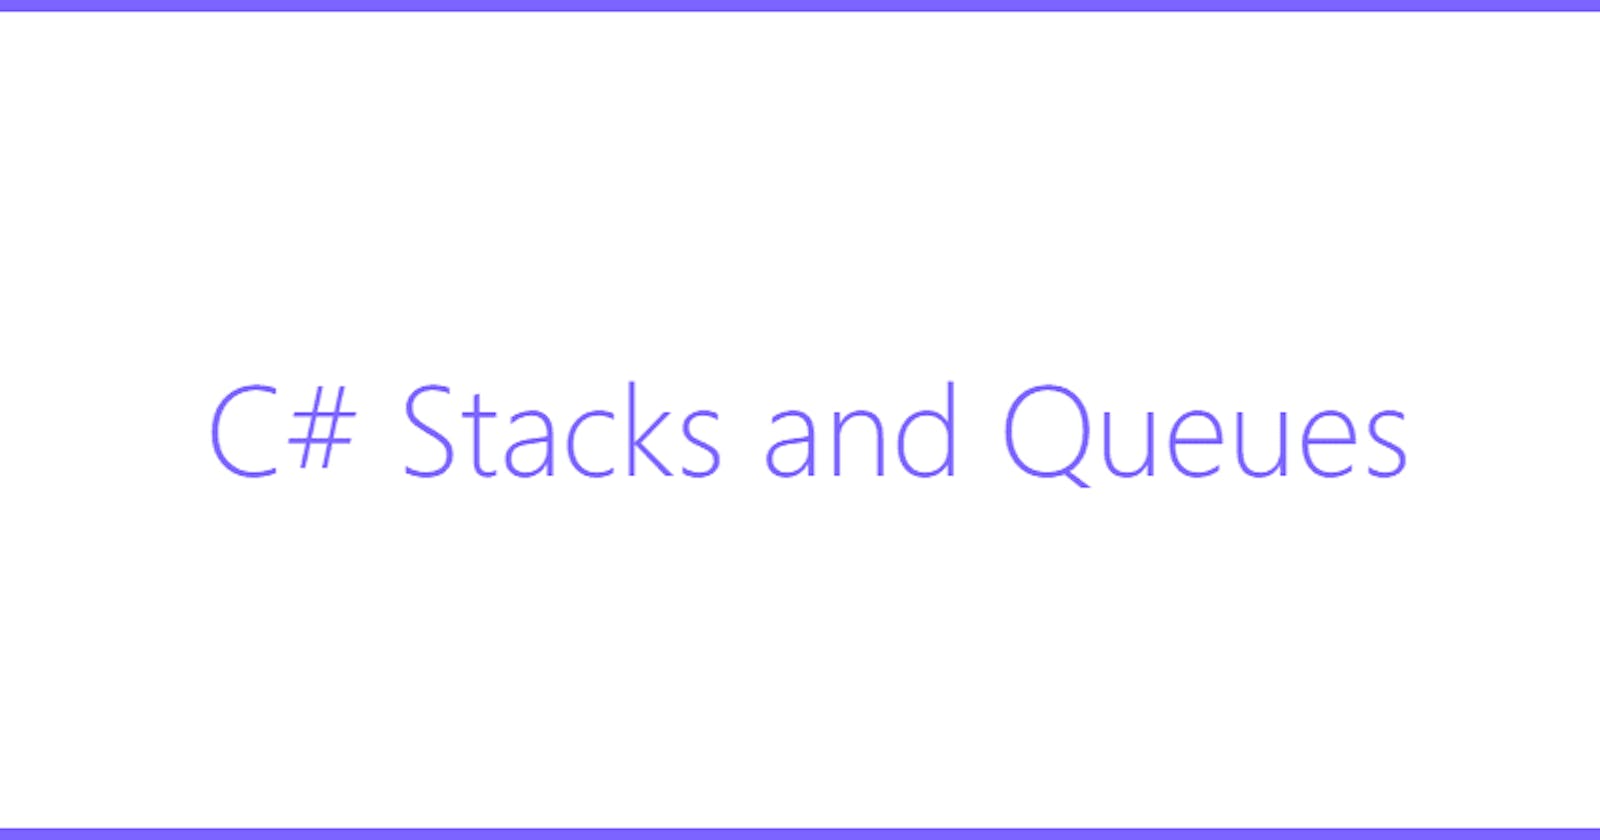 C# Stacks and Queues